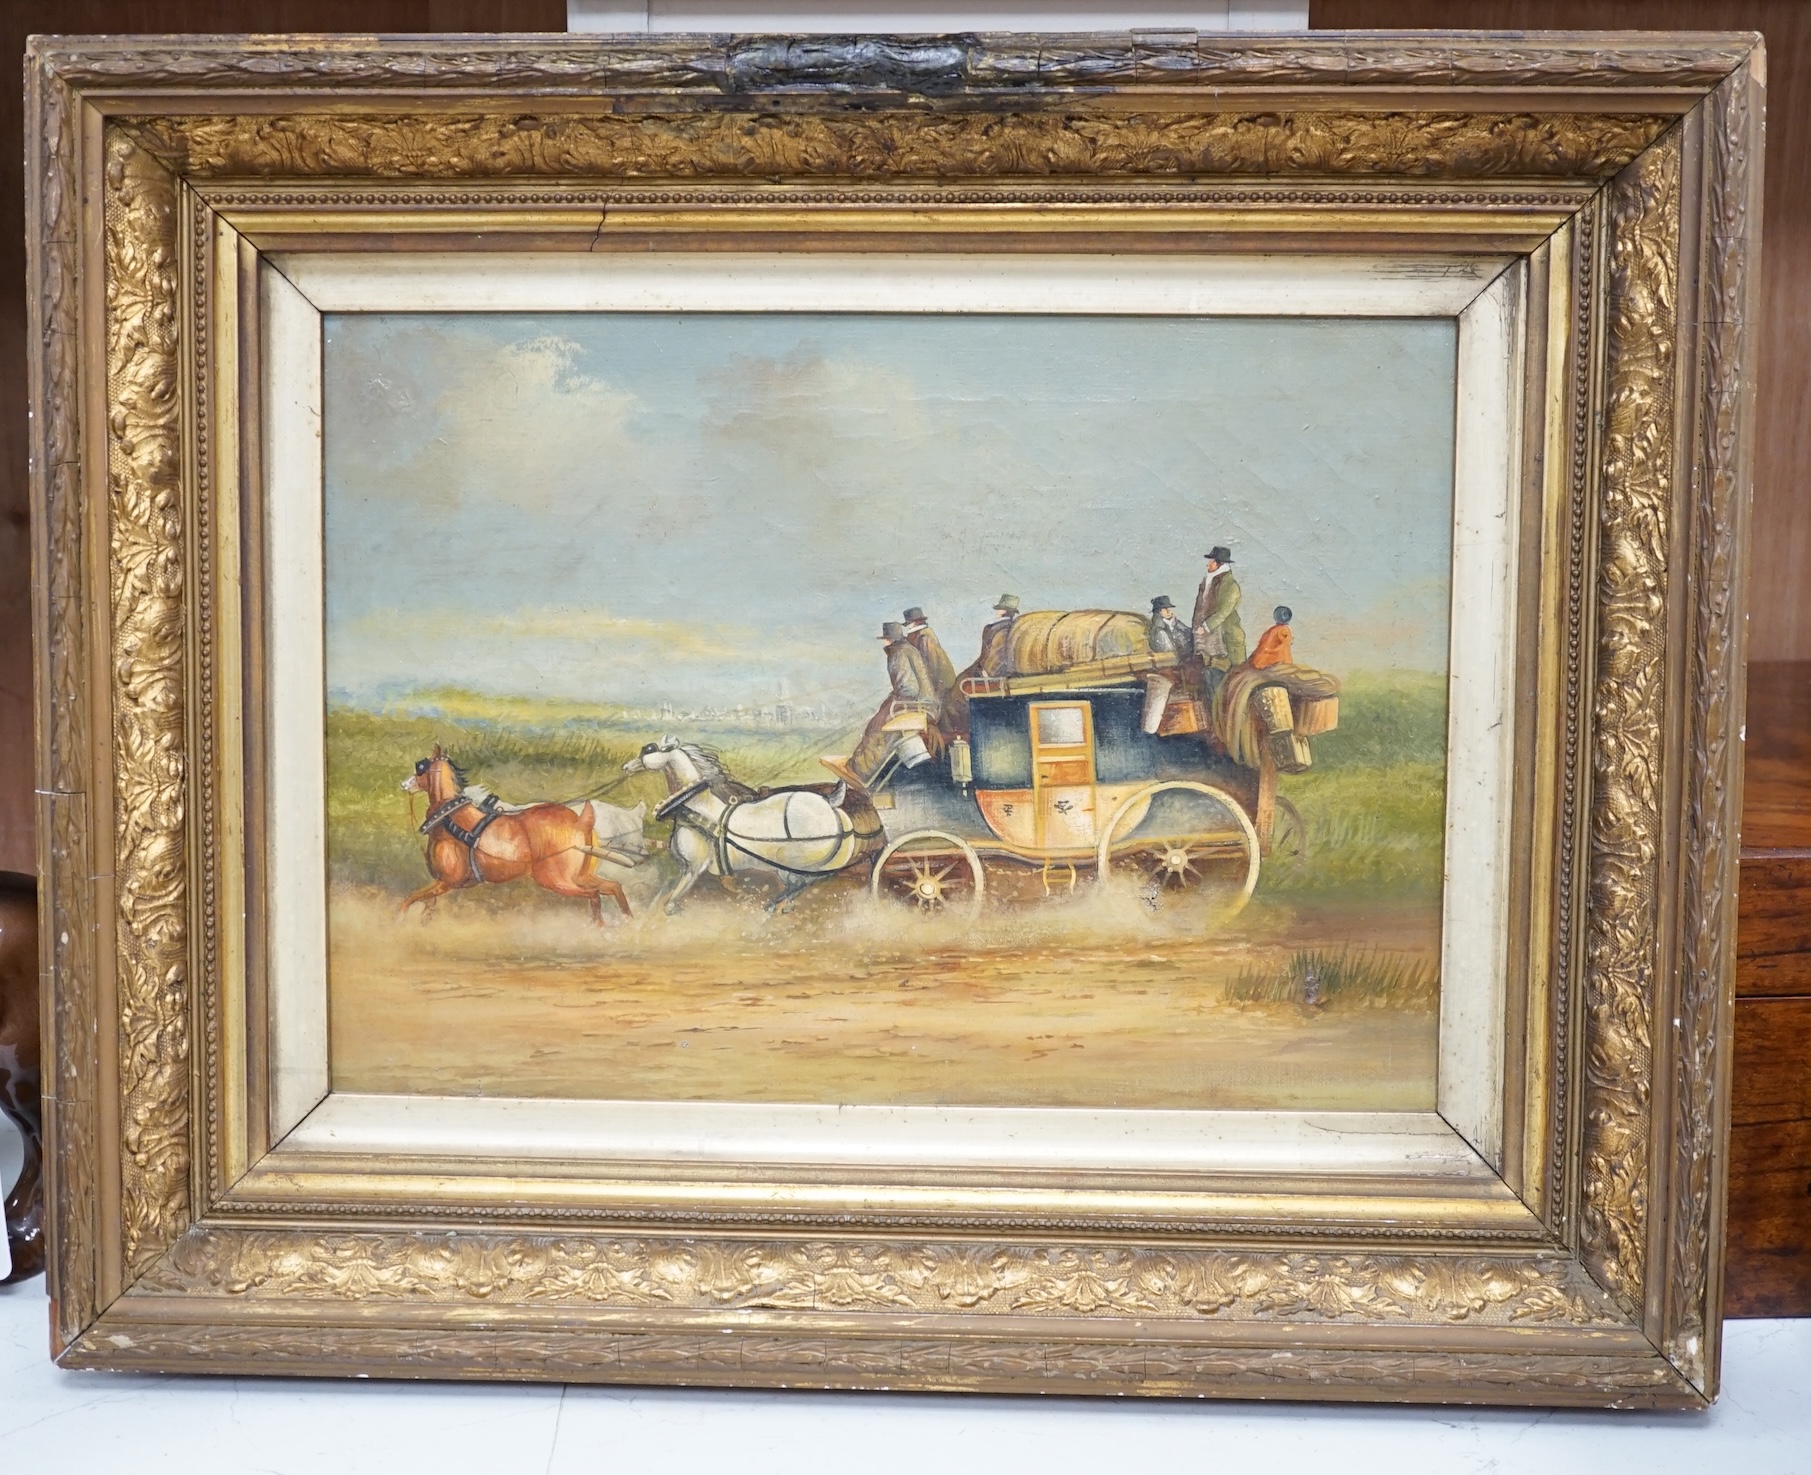 19th century naive oil on canvas, Coaching scene, 24 x 34cm, ornate gilt framed, canvas stamped verso. Condition - fair, some minor damages to the canvas